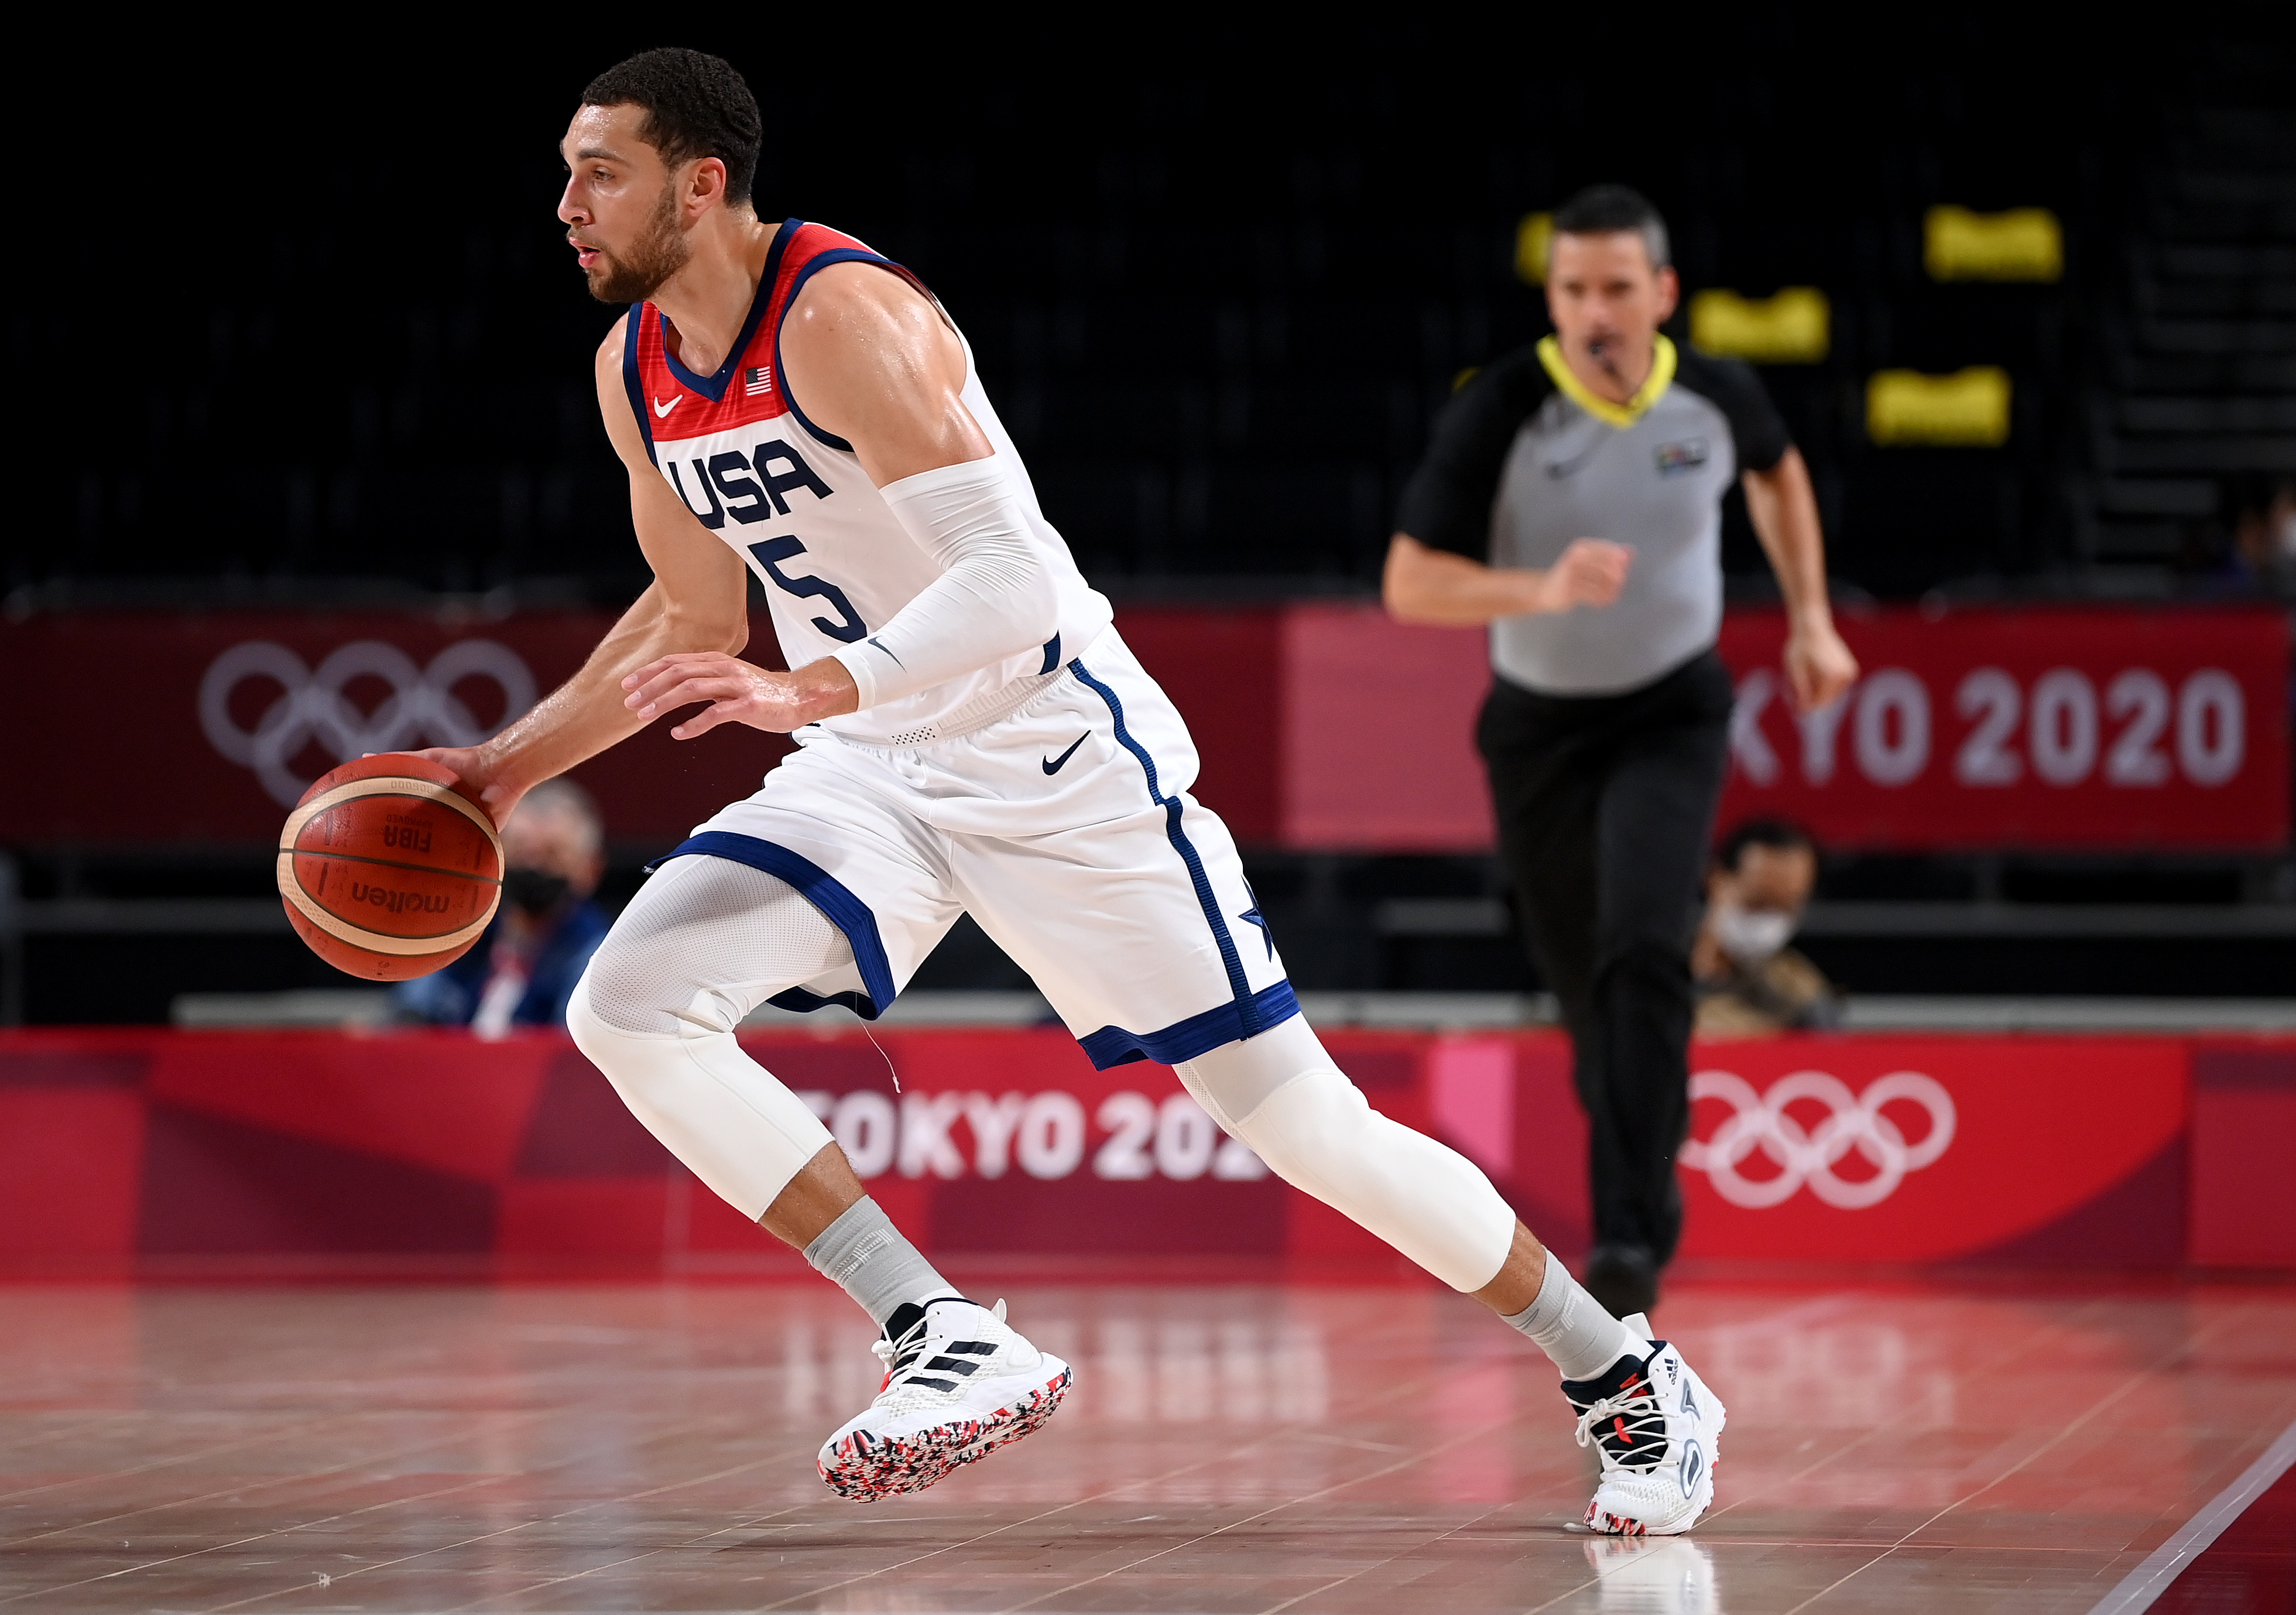 Chicago Bulls star Zach LaVine dribbles during Team USA's win over Iran in the 2020 Tokyo Olympics